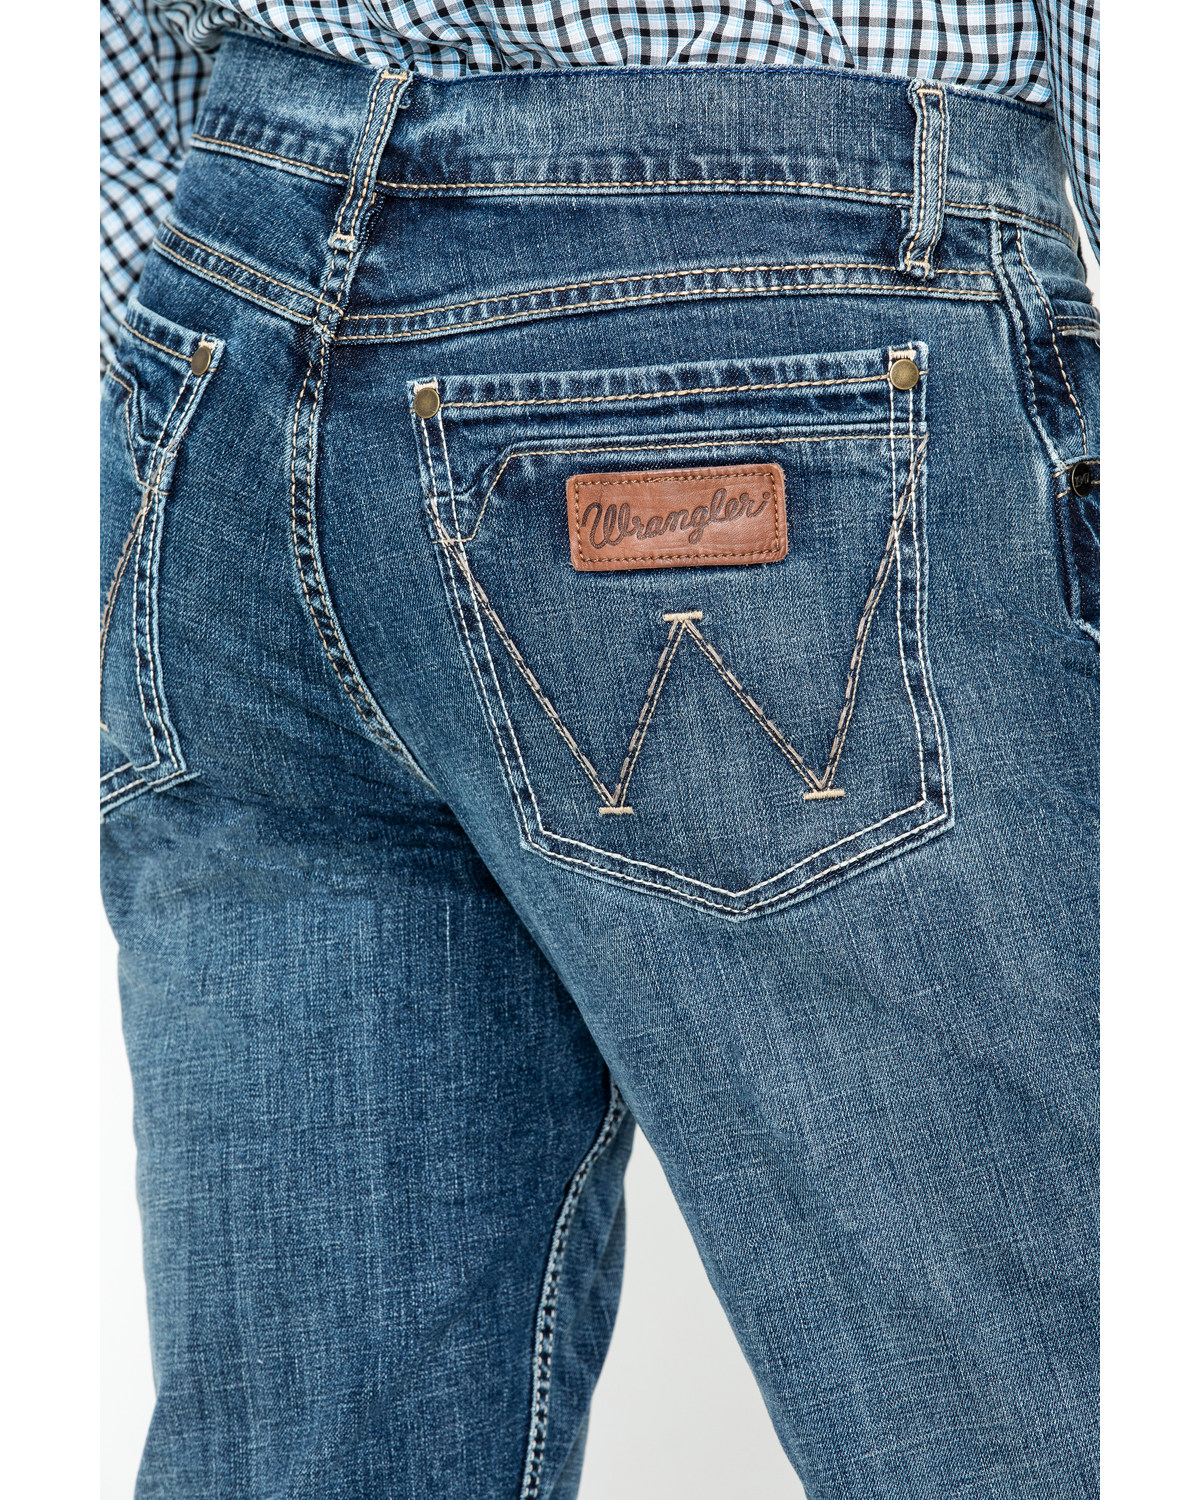 Wrangler Men's Limited Edition Retro Boot Cut Jeans | Boot Barn